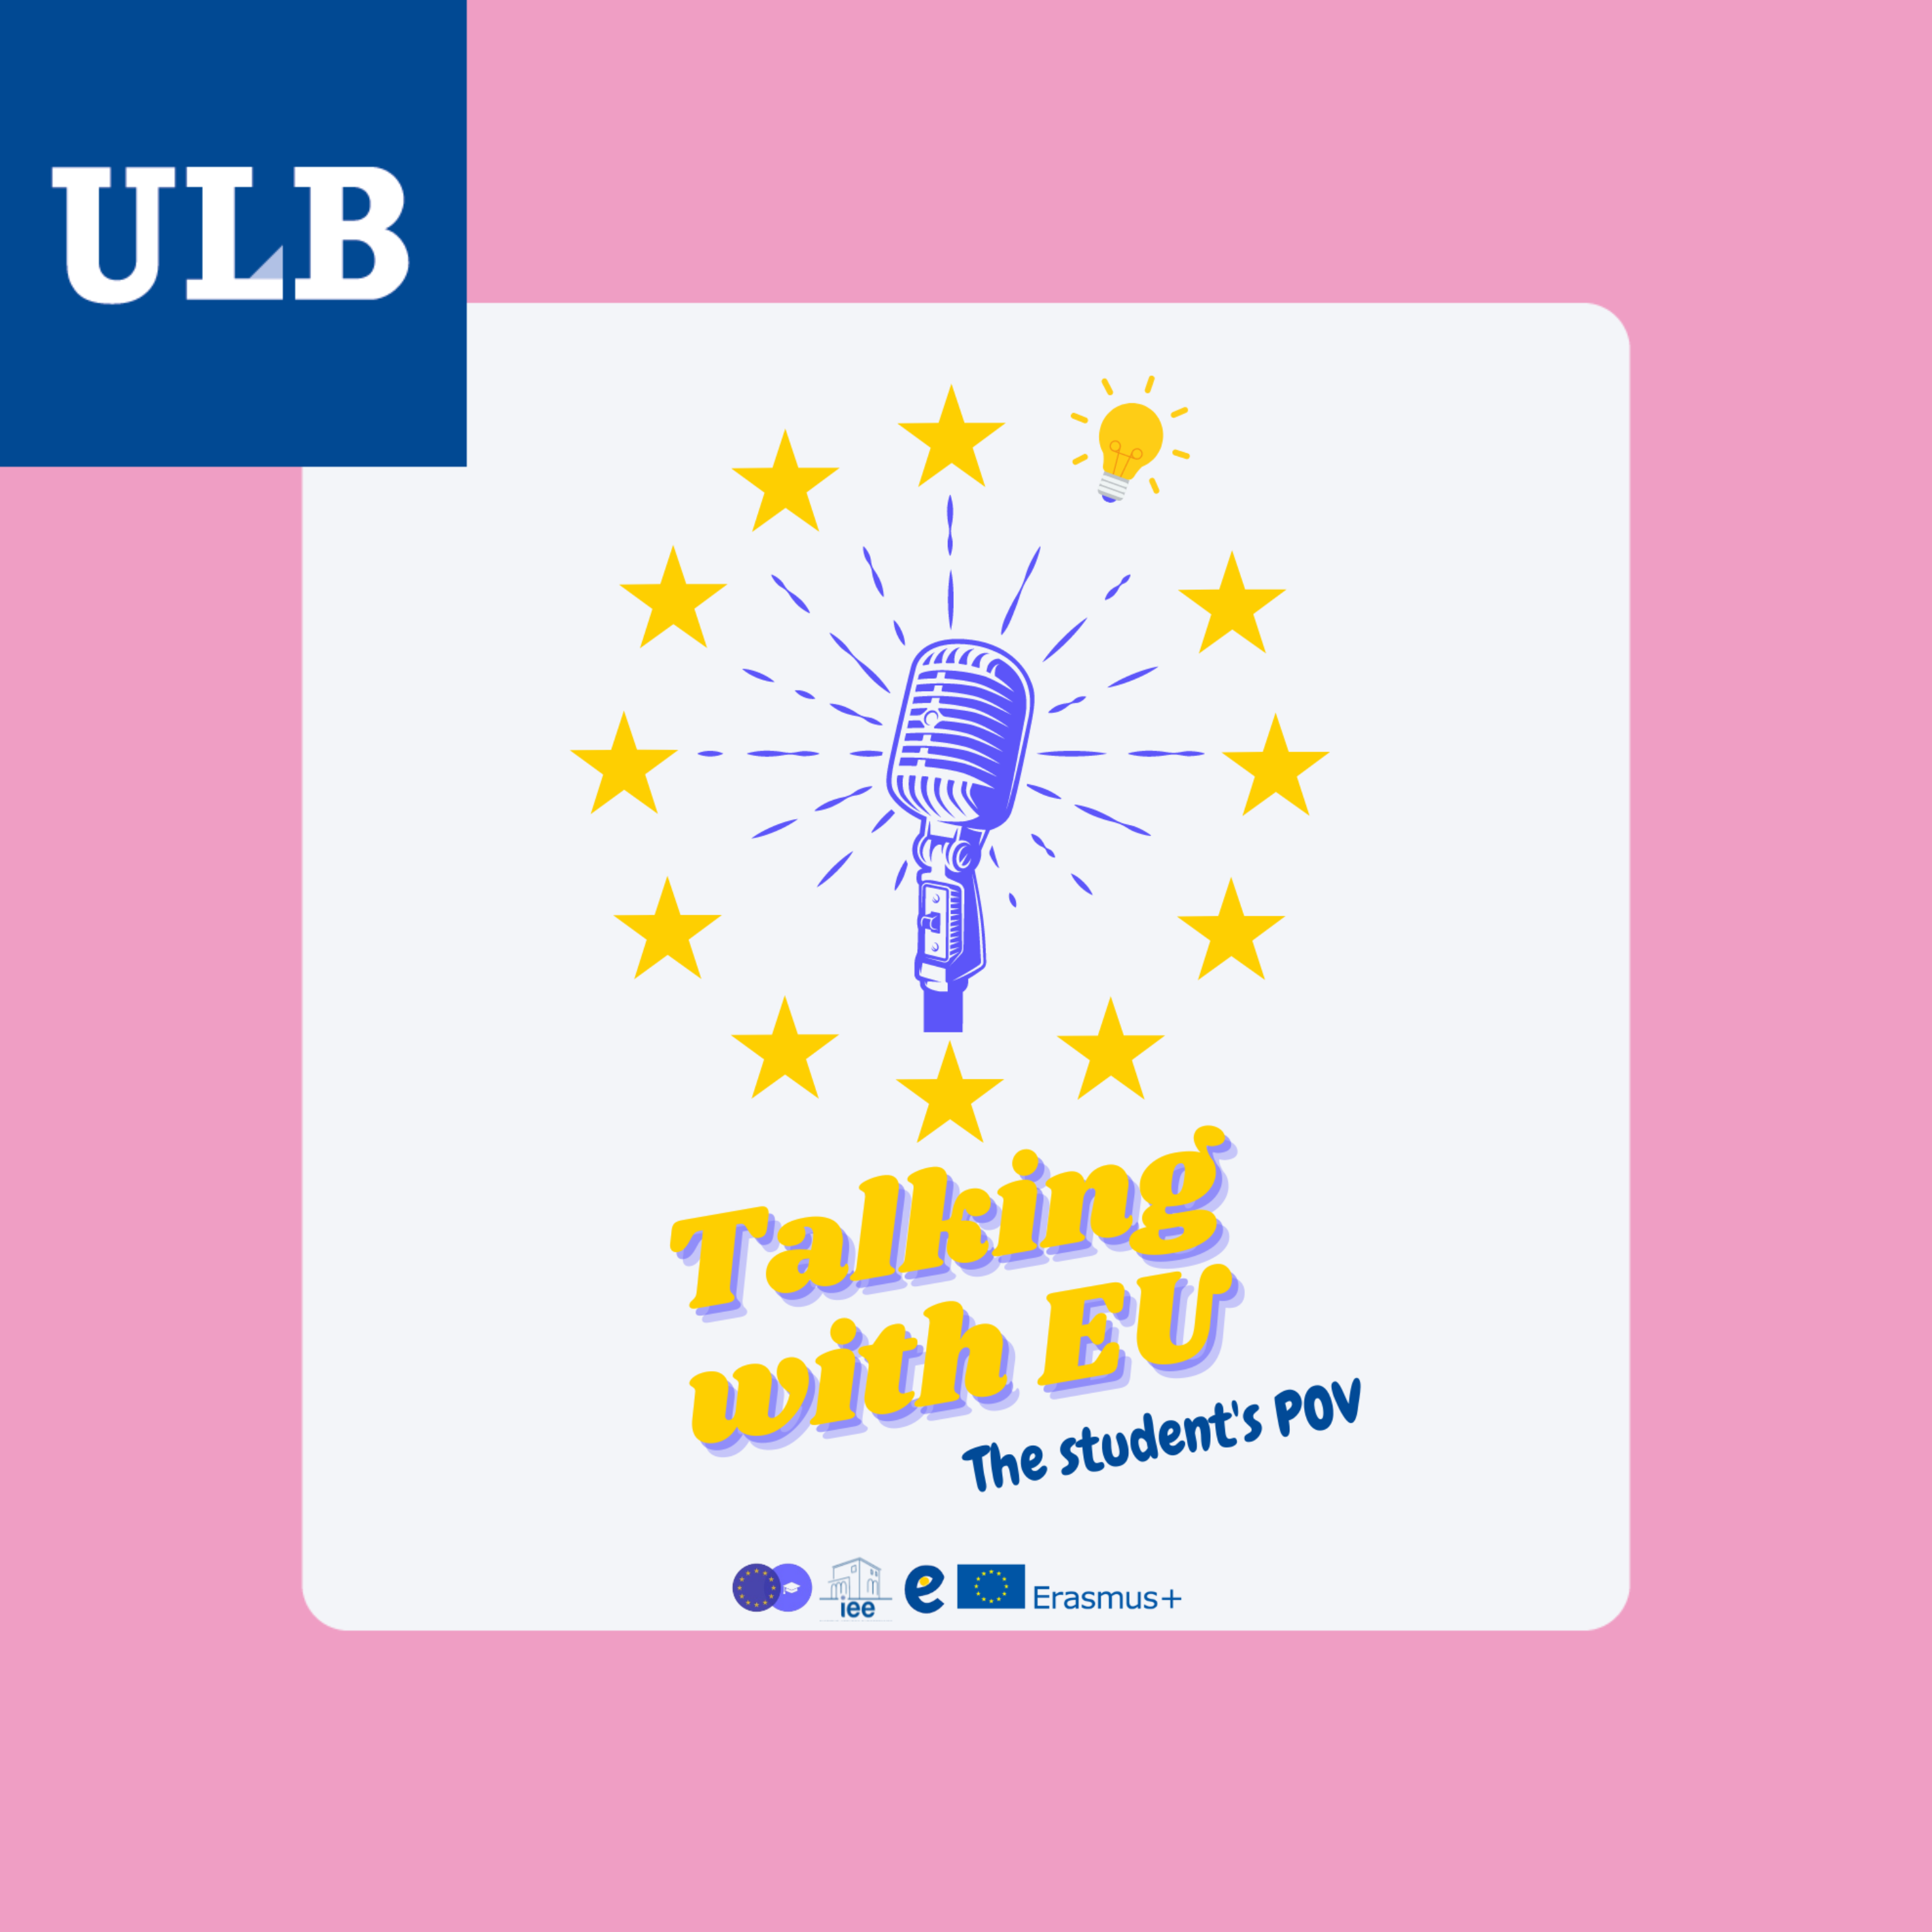 ULB Podcasts - Talking with EU